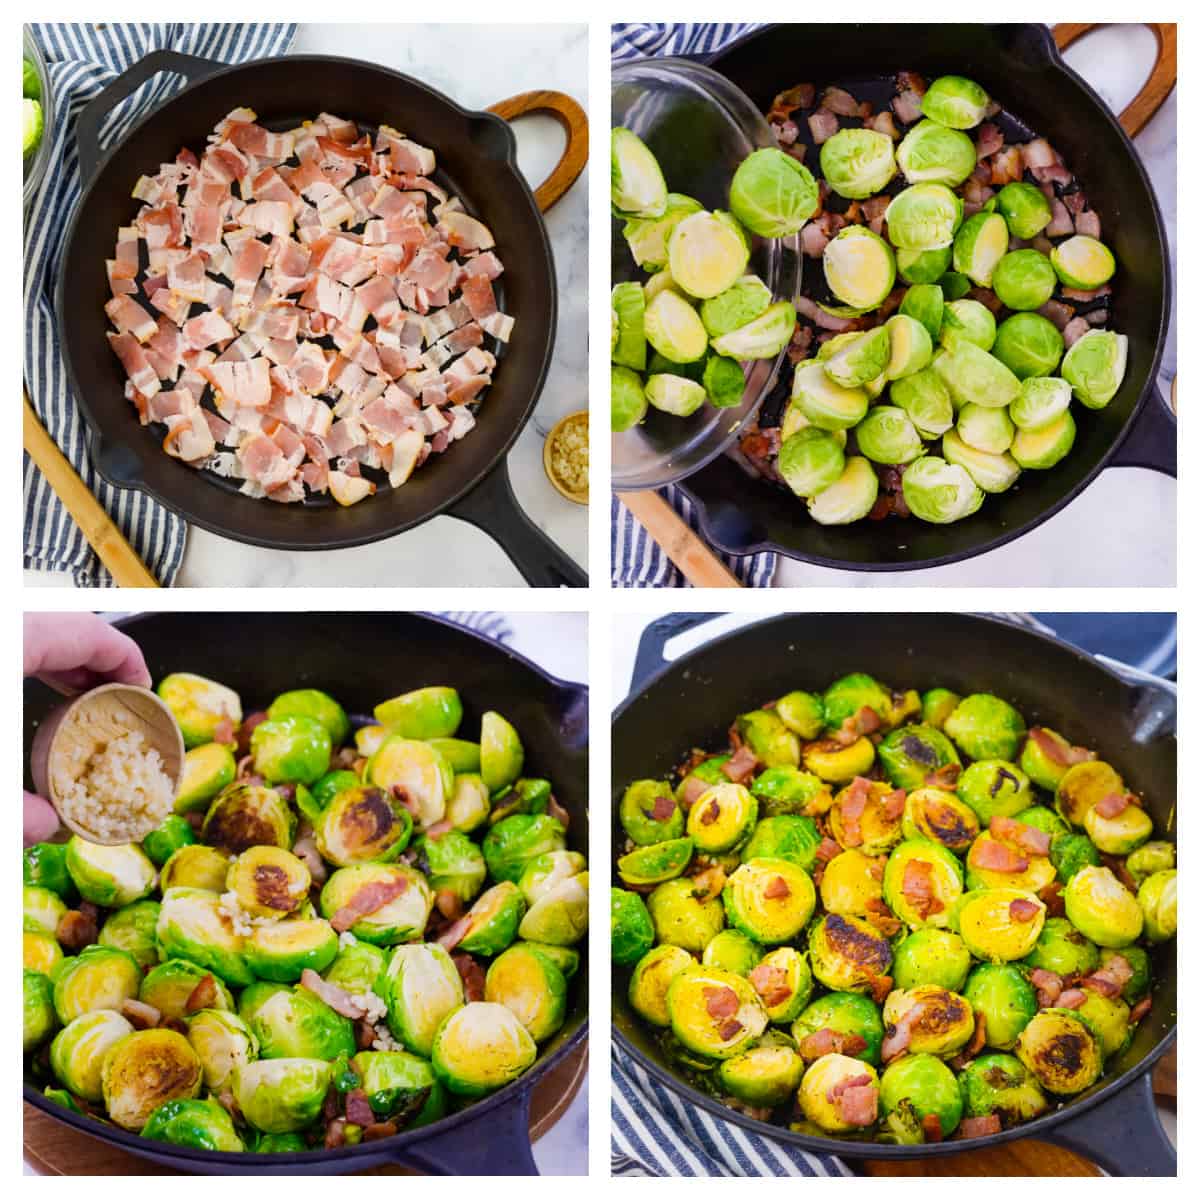 Collage showing how to make sauteed brussels sprouts.